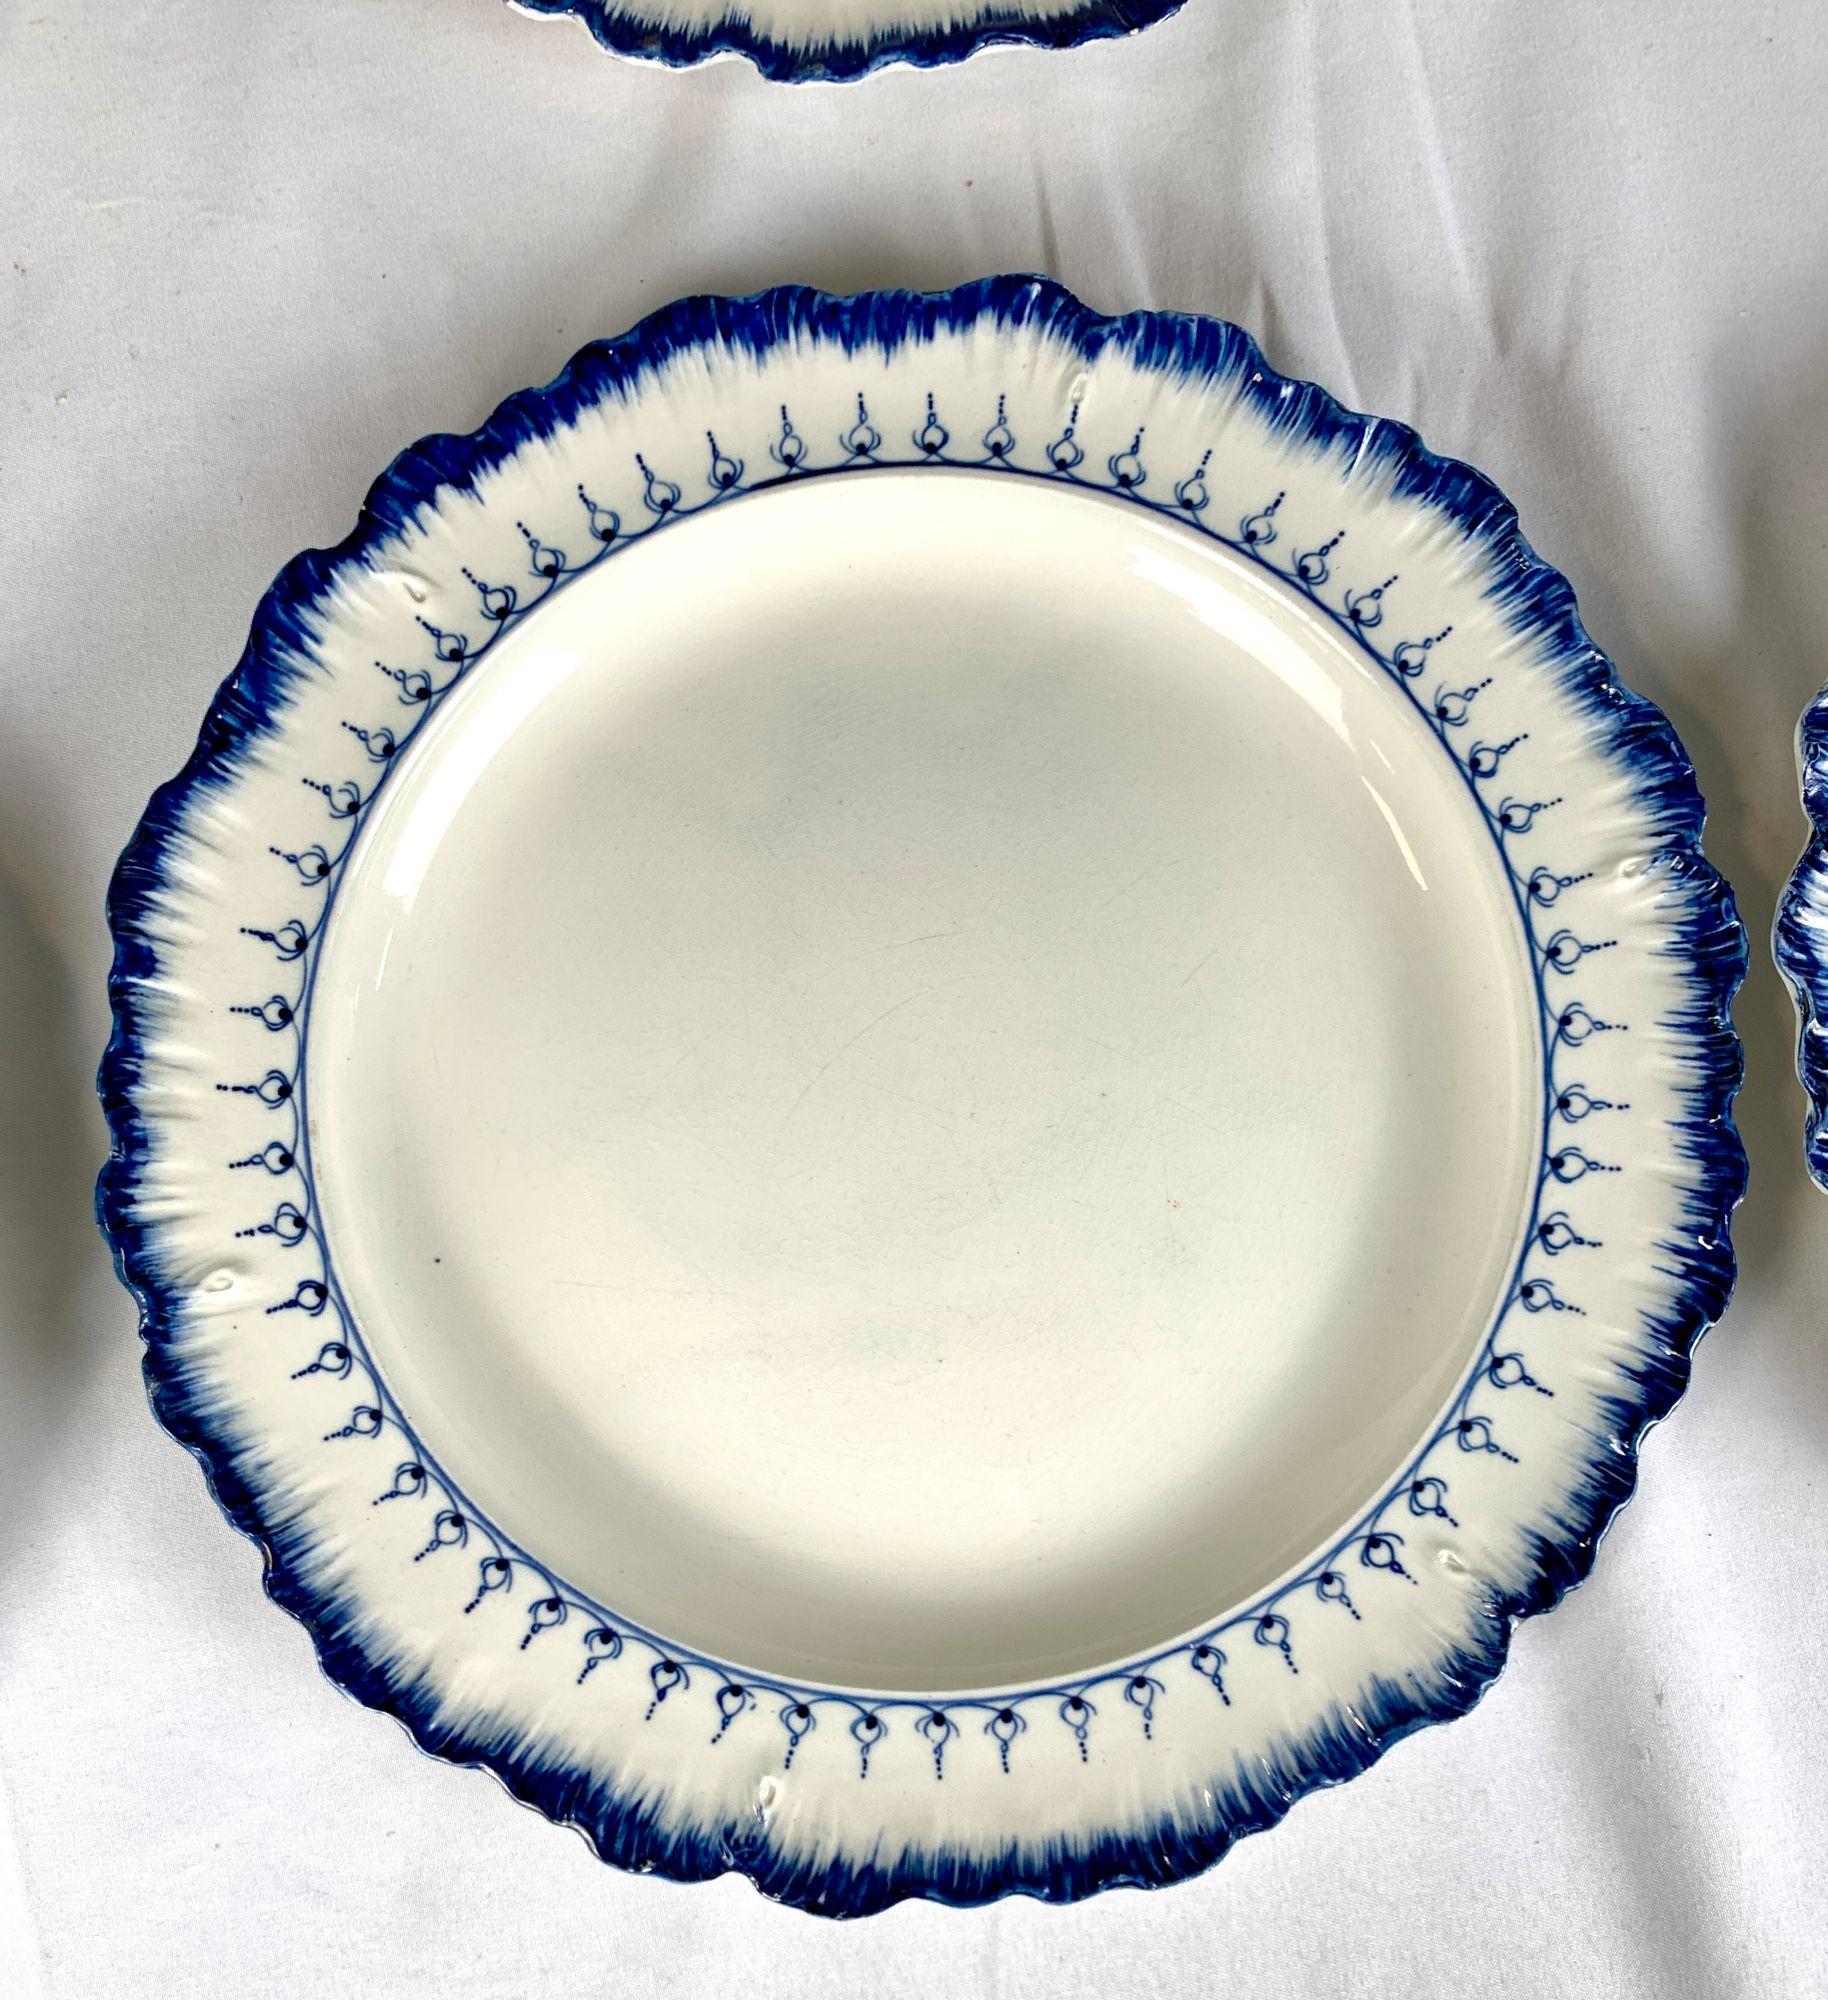 Glazed Set Eight Wedgwood Dinner Plates Mared Pattern Made England Circa 1840 For Sale